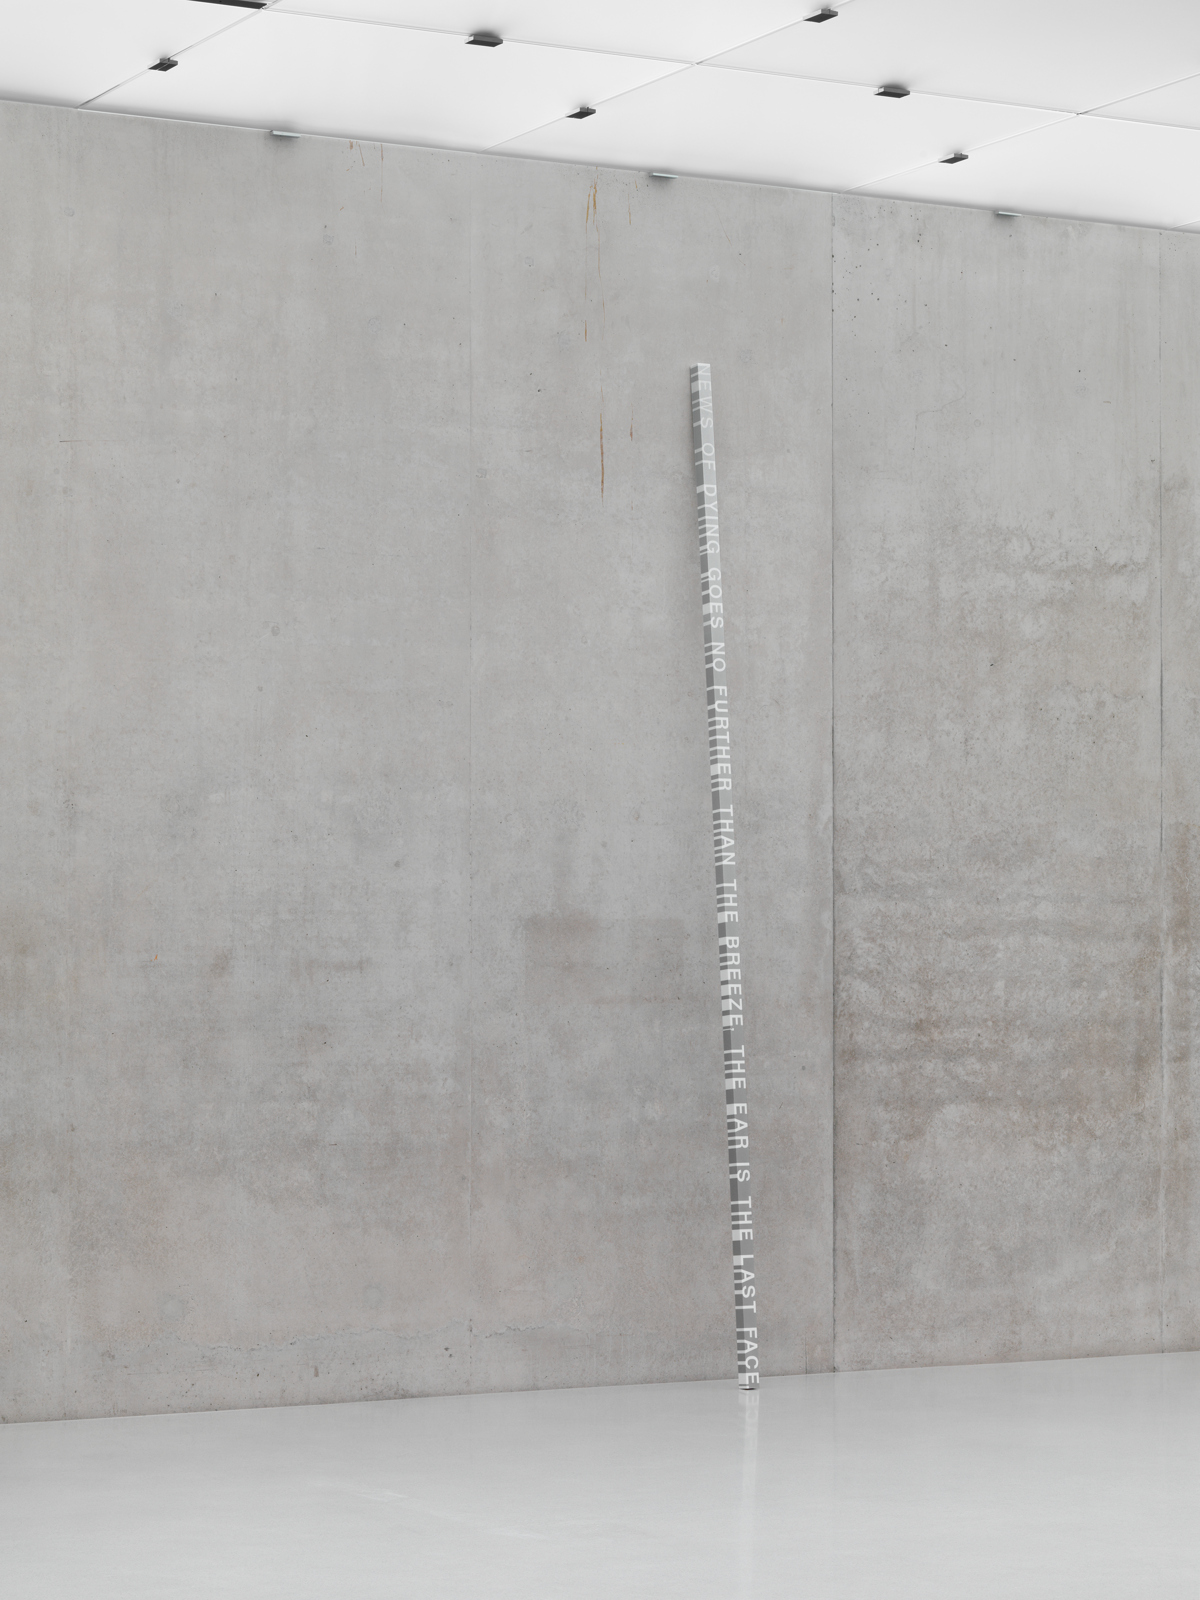 Roni Horn / White Dickinson, installation view, "Well and Truly", Kunsthaus Bregenz, 2010  / 2010